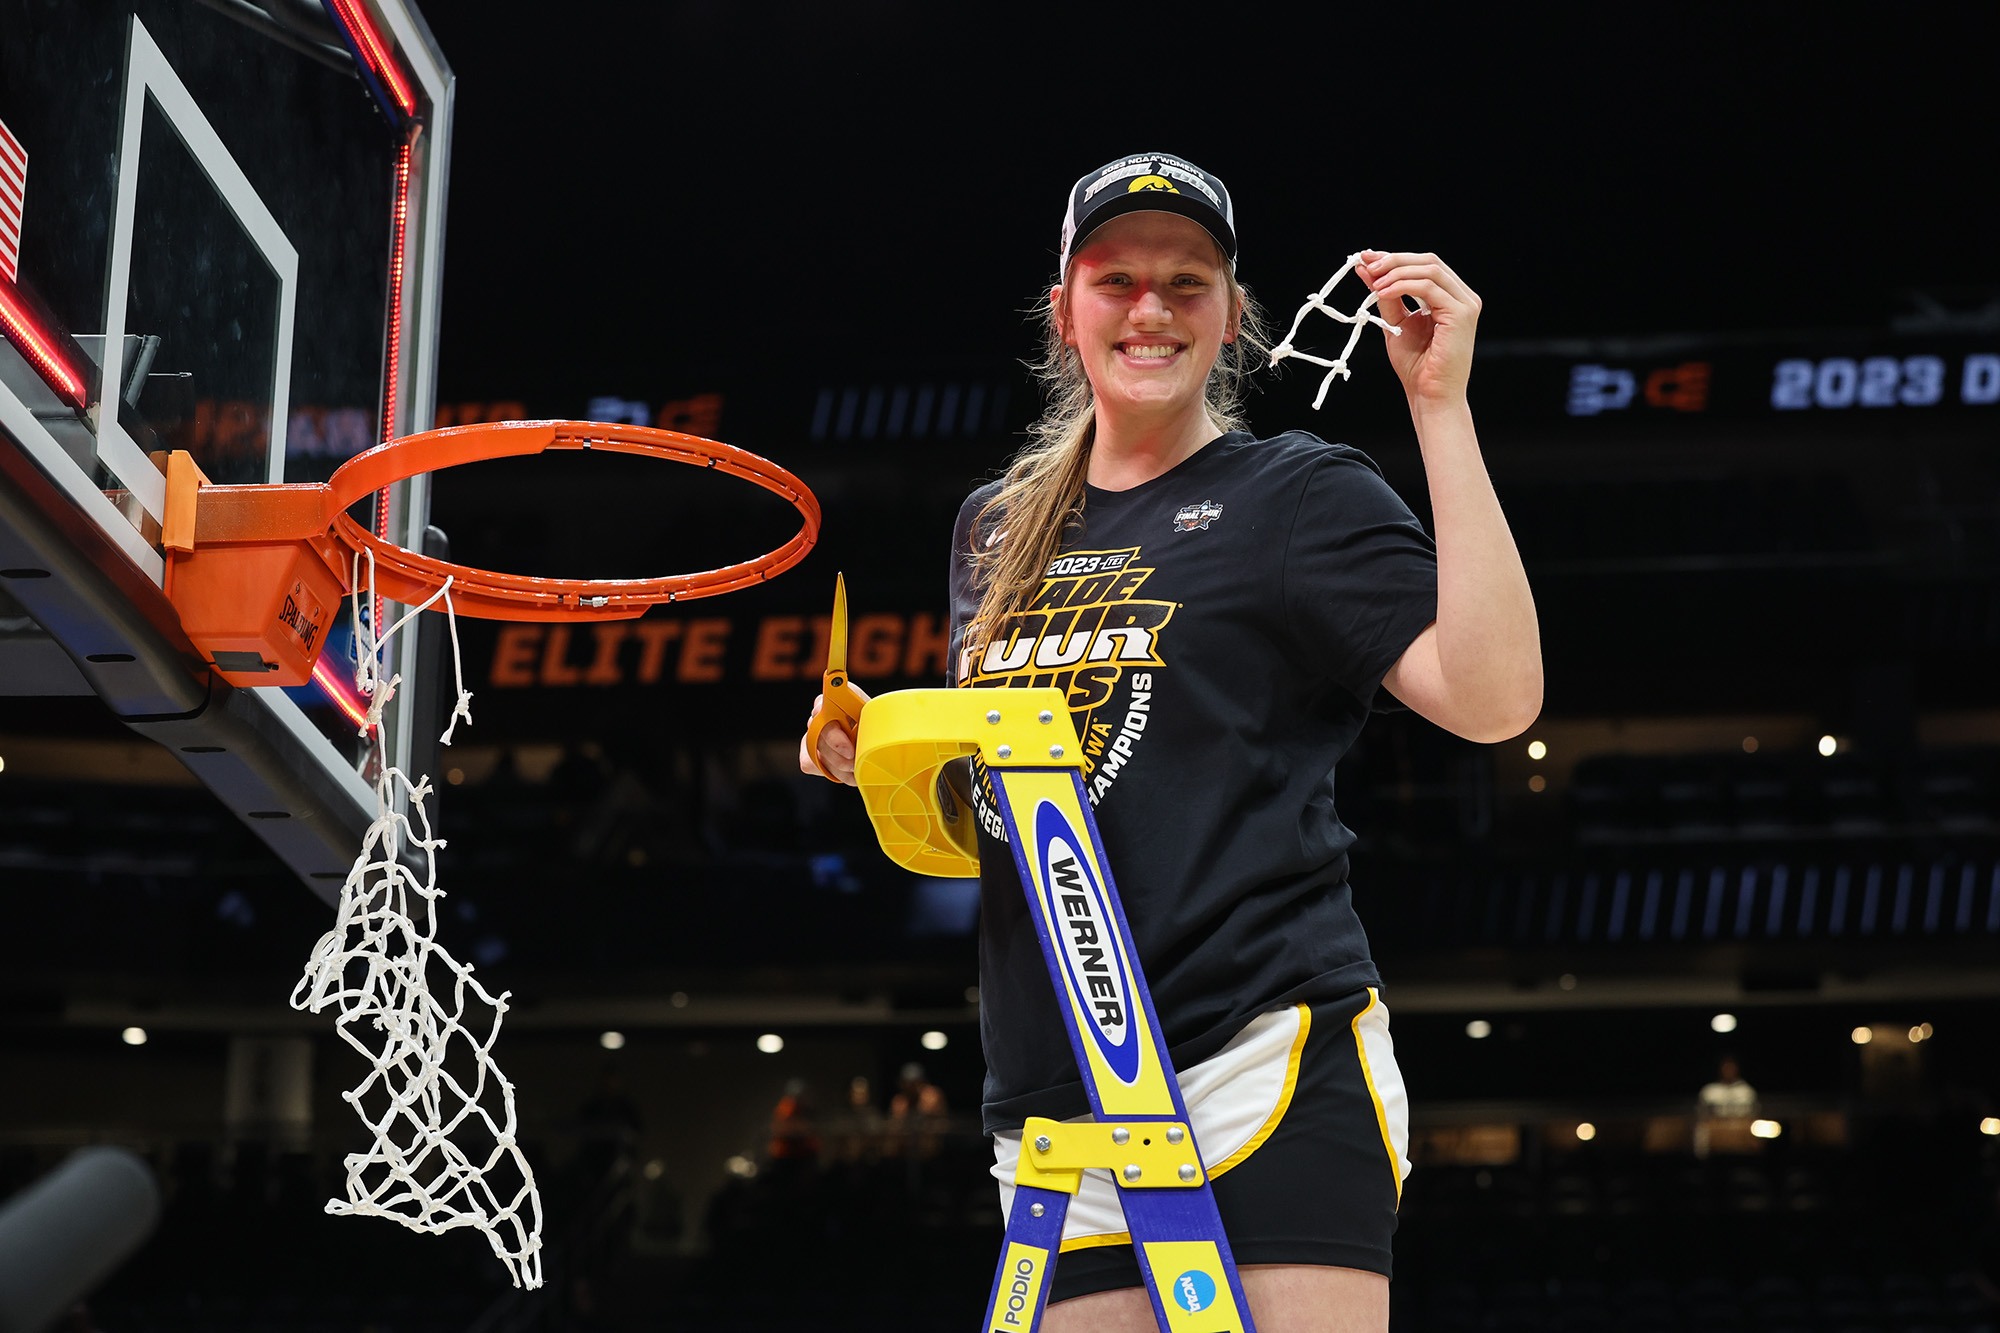 University of Iowa women's basketball player Sharon Goodman standing on a ladder holding a strand of netting after a basketball game